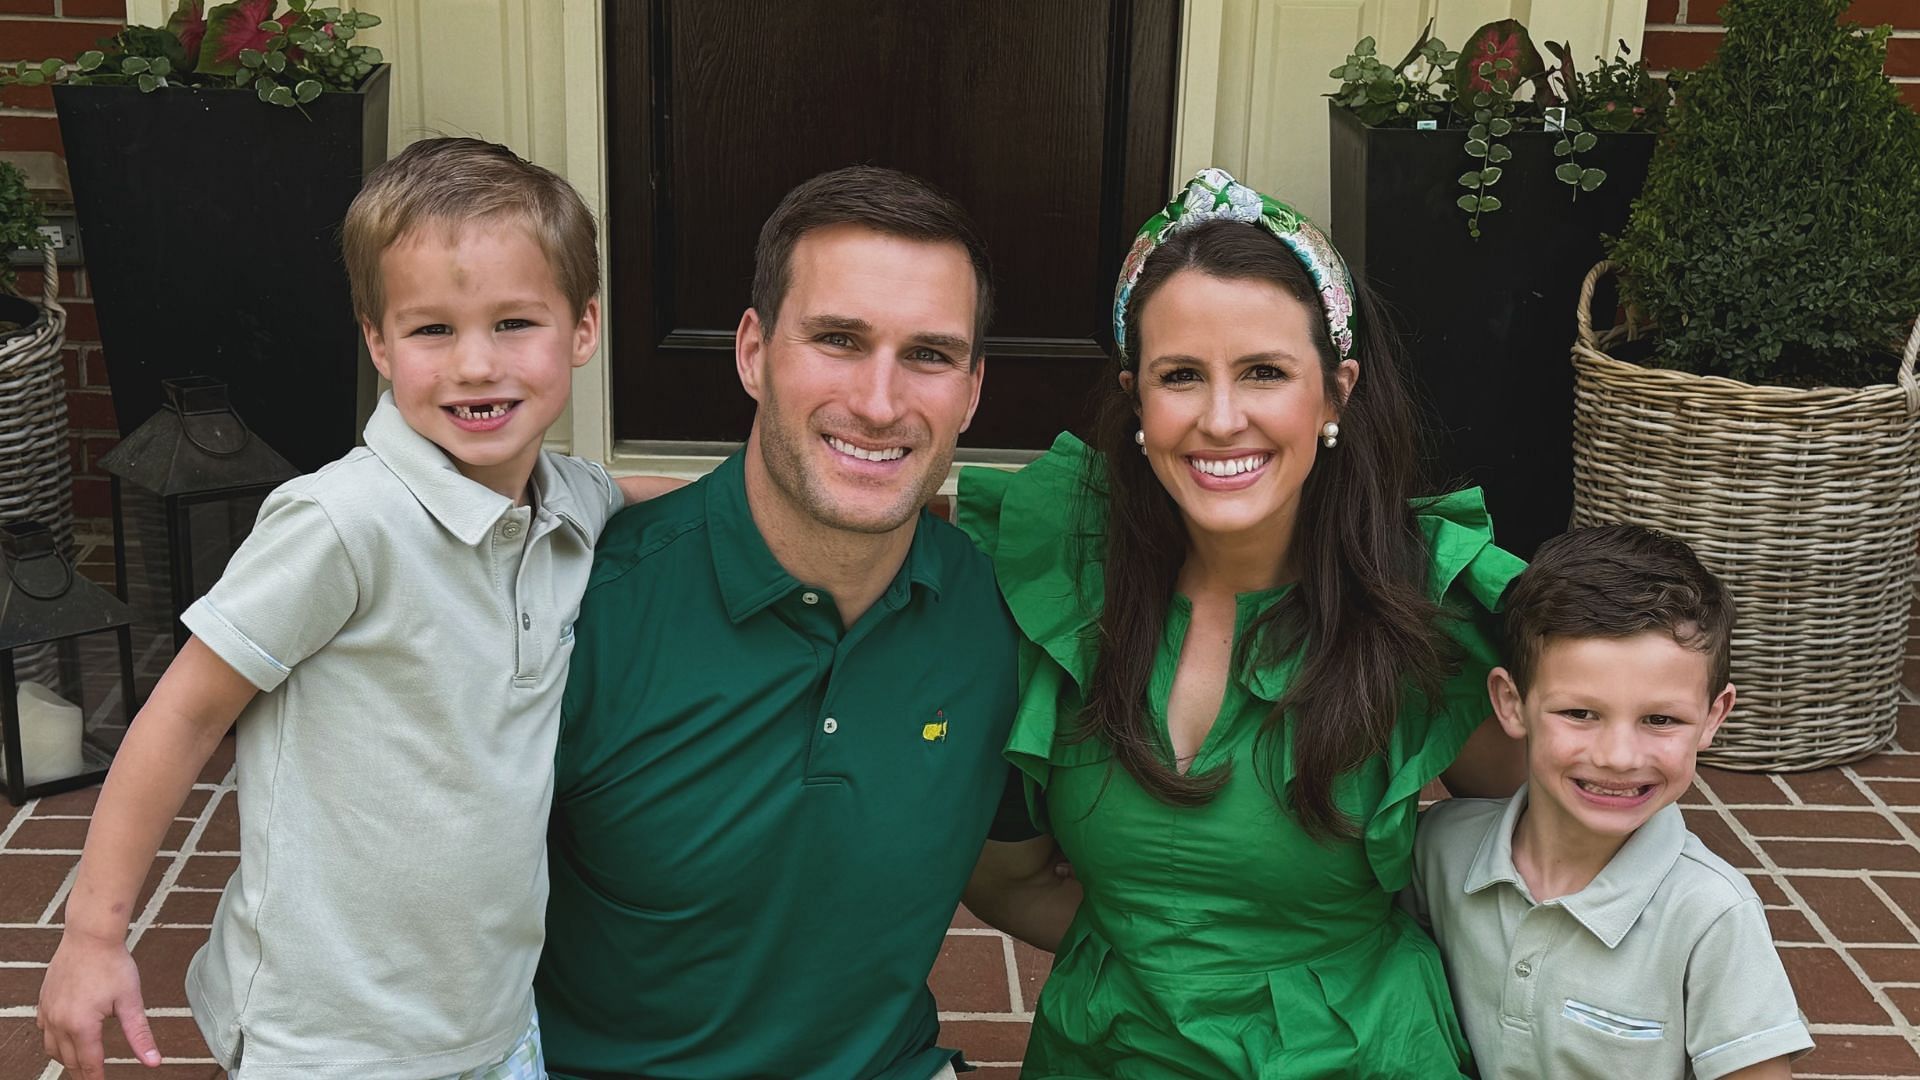 Kirk Cousins and family celebrate first Easter in Atlanta days after Falcons move